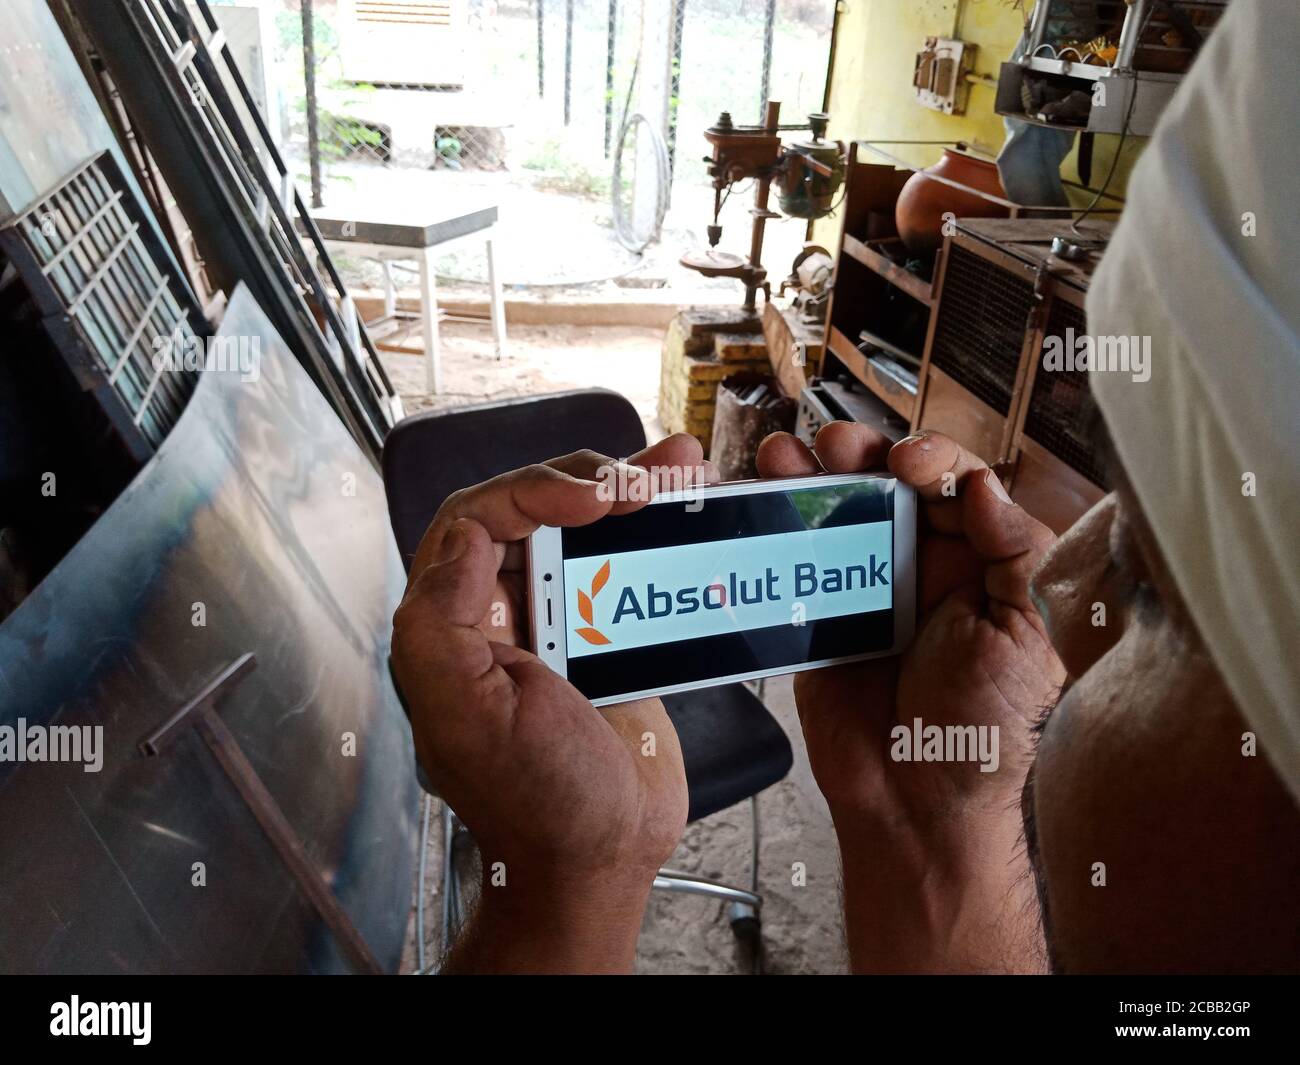 DISTRICT KATNI, INDIA - JUNE 02, 2020: An indian boy holding smart phone with displaying Absolut Bank logo on screen, modern russian banking education Stock Photo